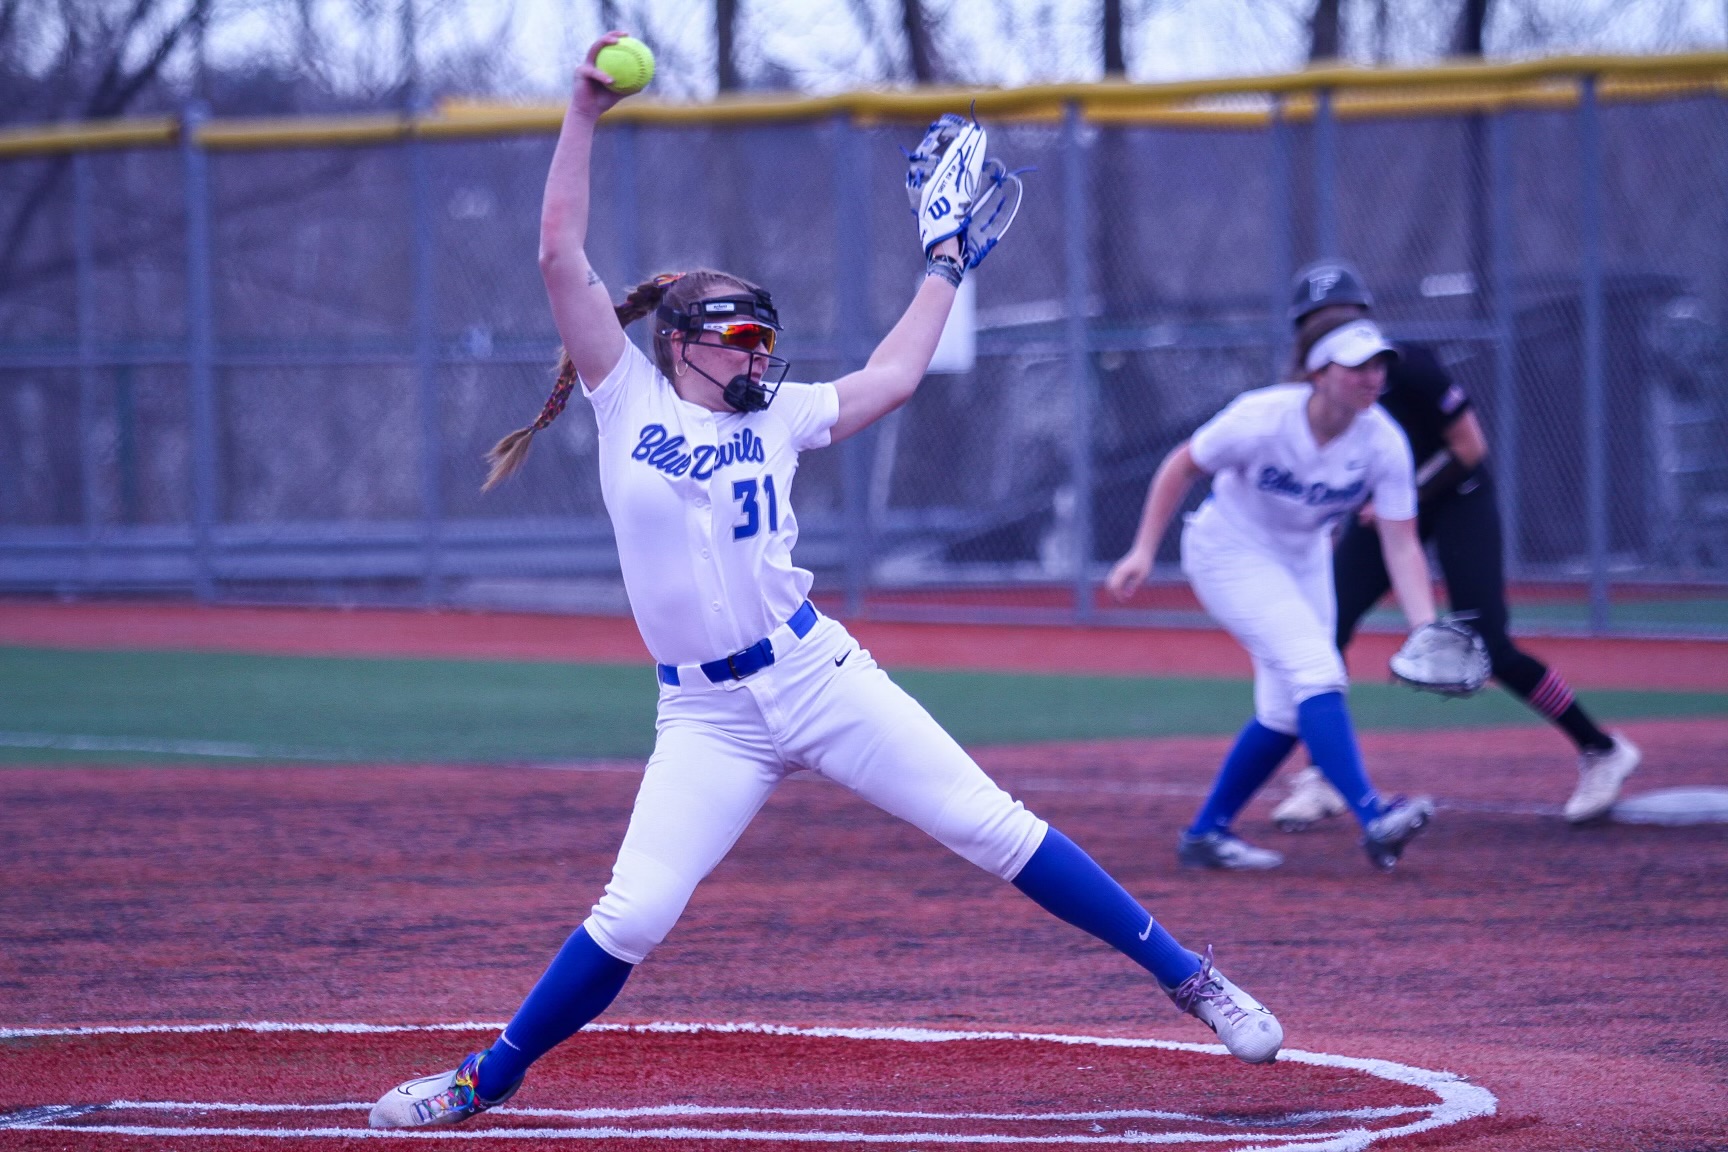 Softball Takes Down Fairfield 6-1 in an In-State Rival